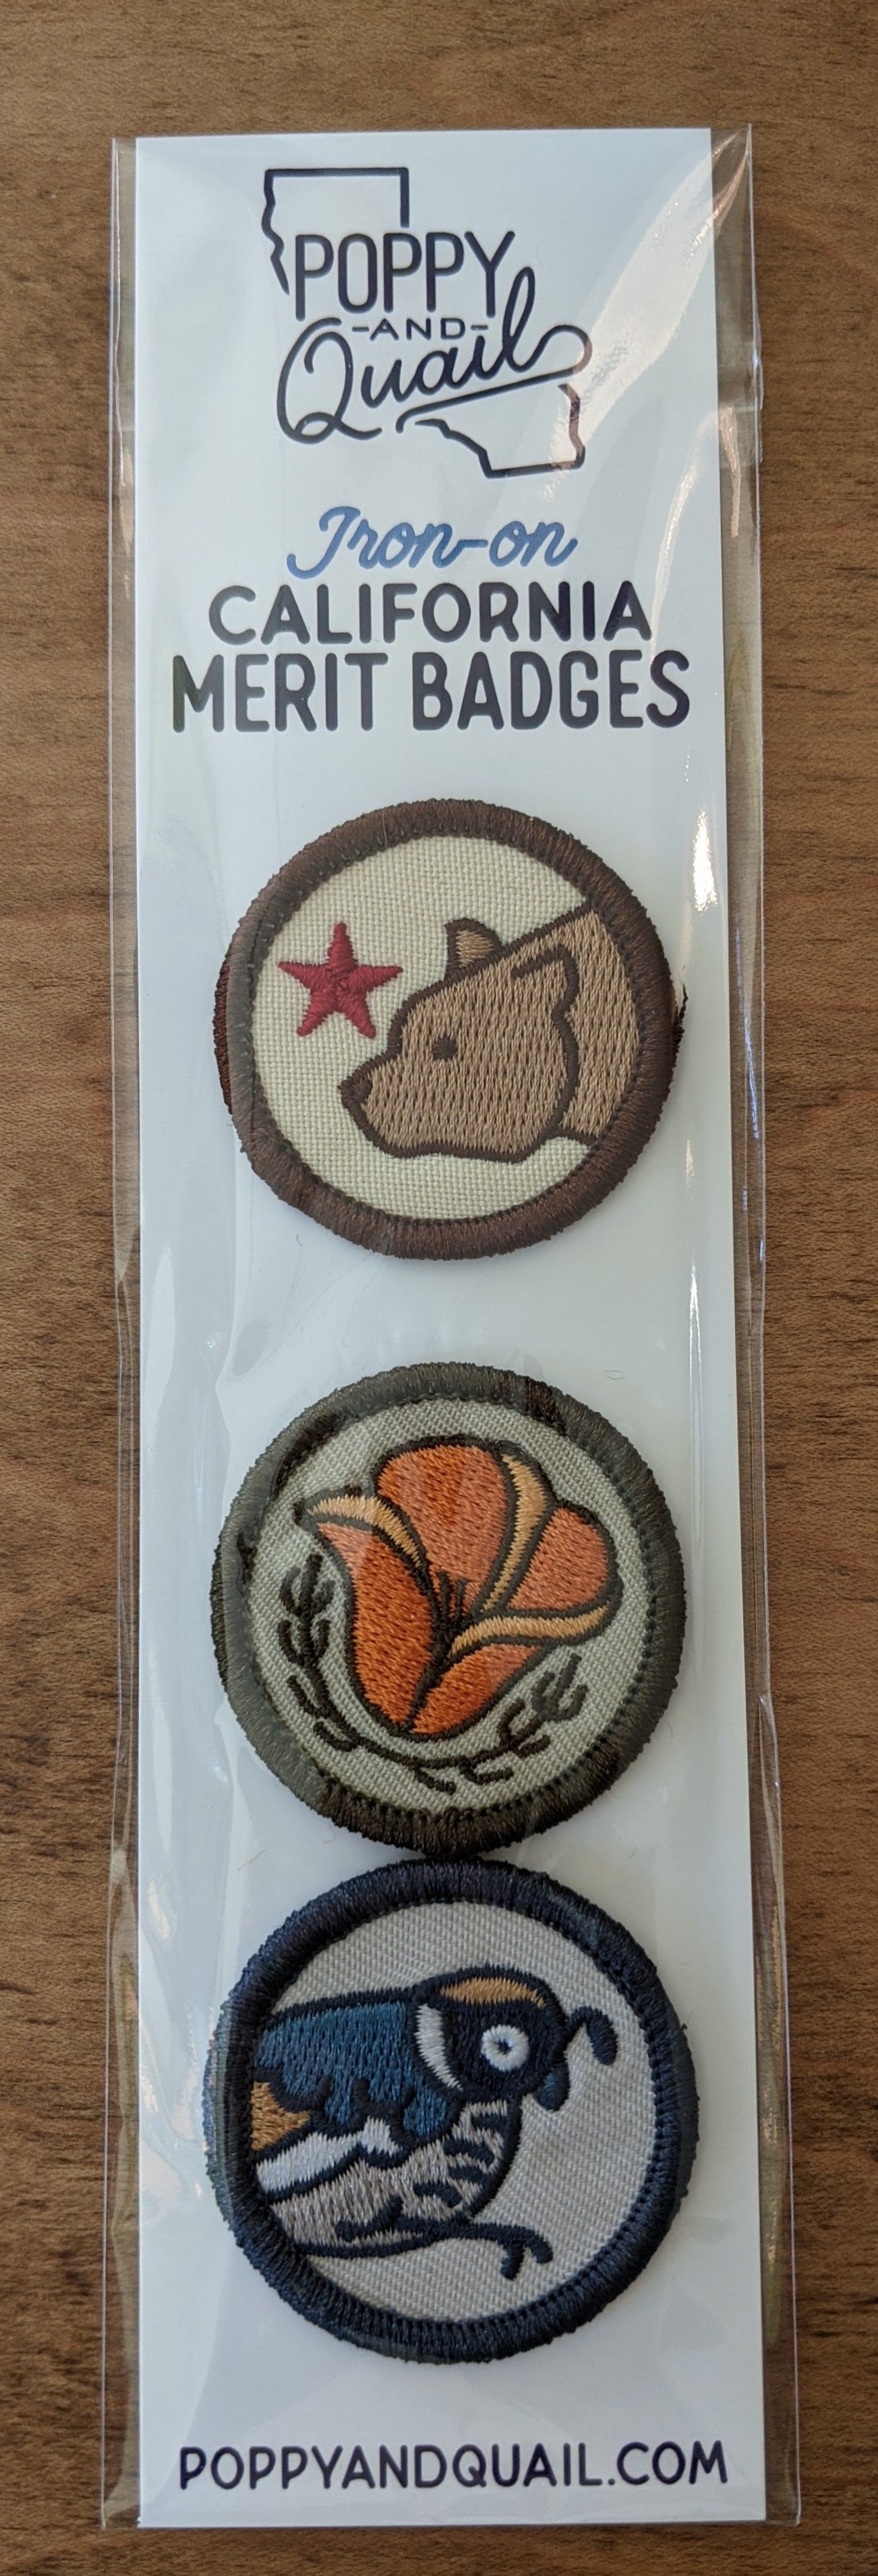 Iron-on Patches Merit Badges series including small round patch of bear, poppy and quail by Poppy & Quail